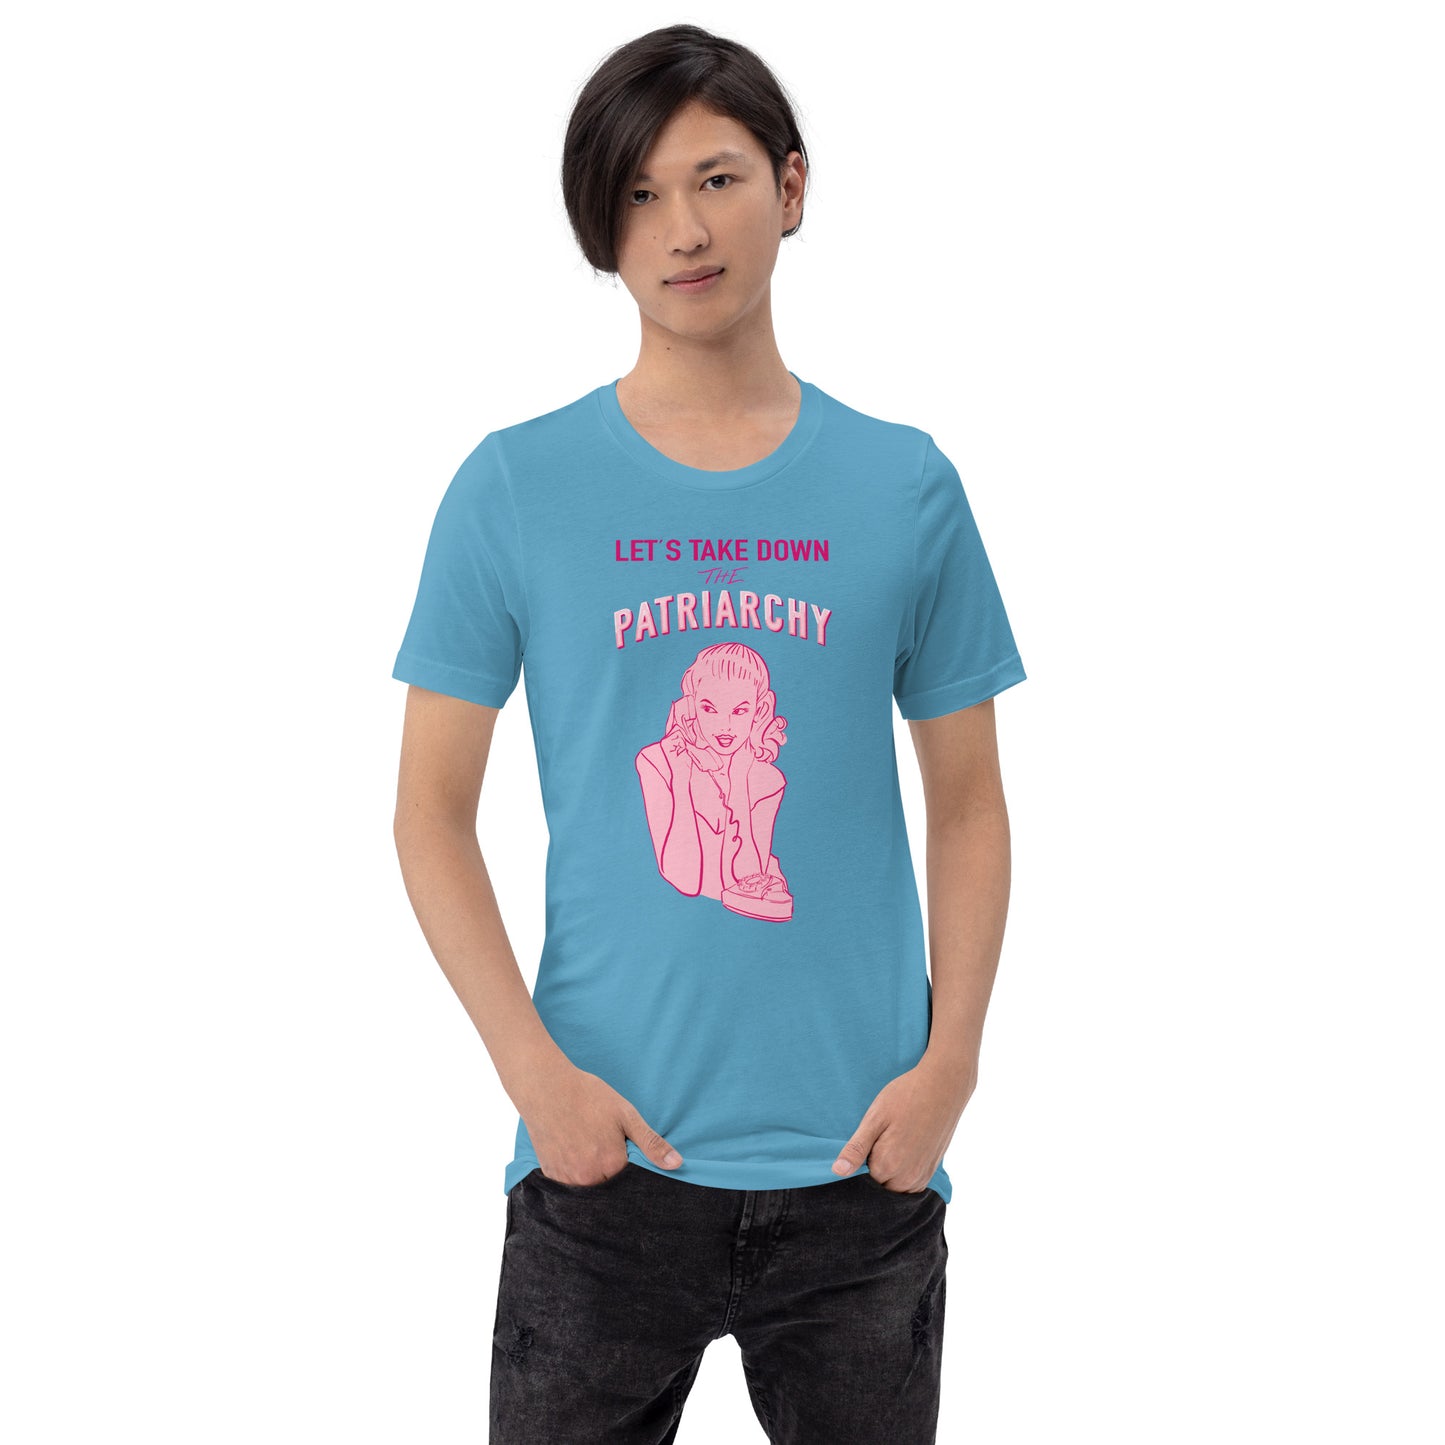 Lets Take Down The Patriarchy Tee in Pink or Ocean Blue